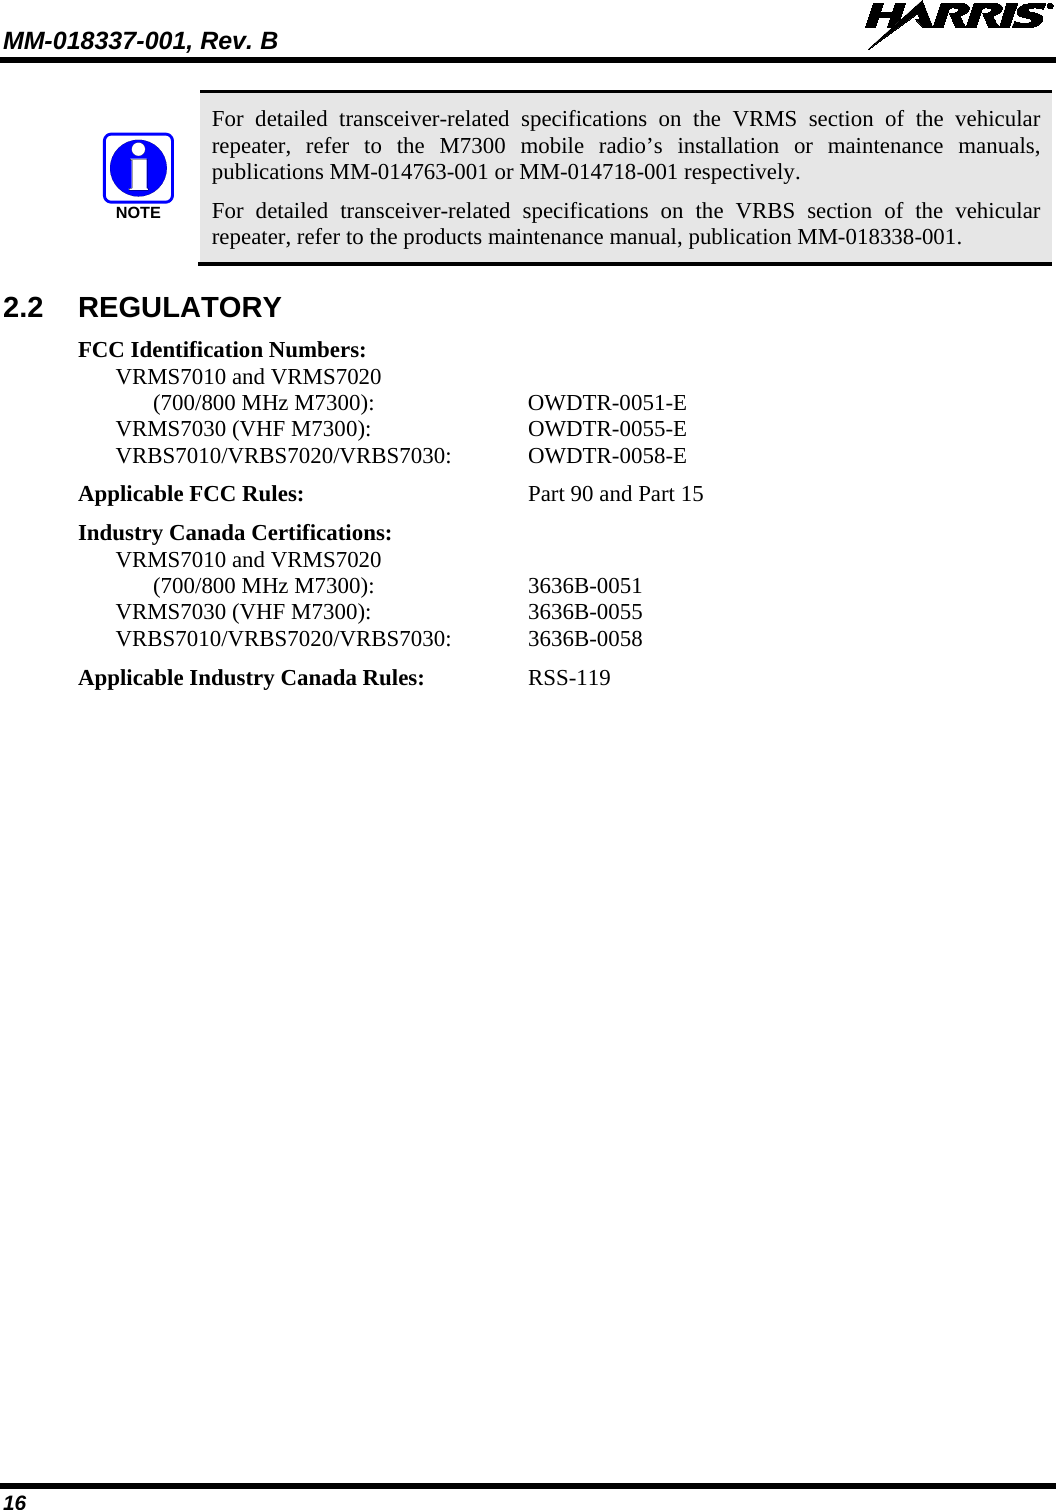 MM-018337-001, Rev. B   16 NOTE For detailed transceiver-related specifications on the VRMS section of the vehicular repeater, refer to the M7300 mobile radio’s installation or maintenance manuals, publications MM-014763-001 or MM-014718-001 respectively. For detailed transceiver-related specifications on the VRBS section of the vehicular repeater, refer to the products maintenance manual, publication MM-018338-001. 2.2 REGULATORY FCC Identification Numbers: VRMS7010 and VRMS7020 (700/800 MHz M7300):  OWDTR-0051-E VRMS7030 (VHF M7300):  OWDTR-0055-E VRBS7010/VRBS7020/VRBS7030:  OWDTR-0058-E Applicable FCC Rules: Part 90 and Part 15 Industry Canada Certifications: VRMS7010 and VRMS7020 (700/800 MHz M7300):  3636B-0051 VRMS7030 (VHF M7300):  3636B-0055 VRBS7010/VRBS7020/VRBS7030:  3636B-0058 Applicable Industry Canada Rules:  RSS-119 